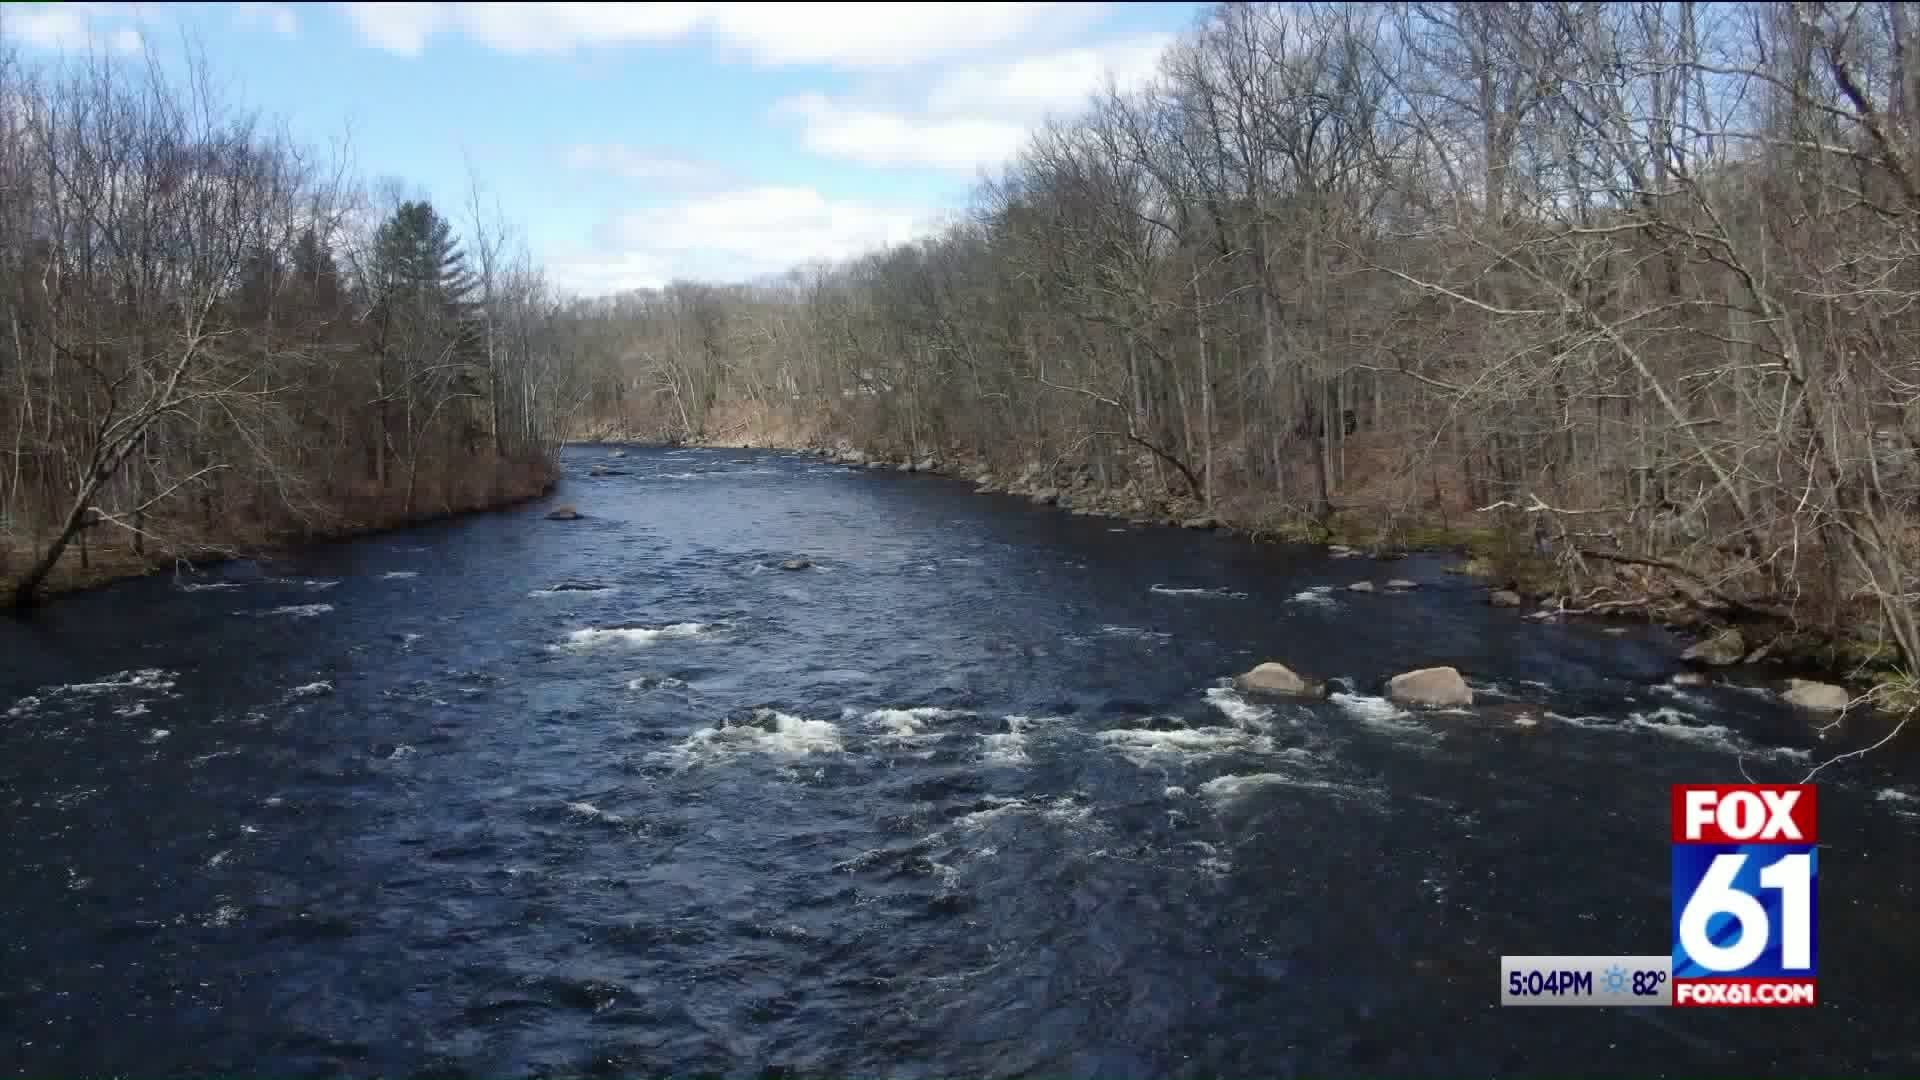 Government mobilizes to aid in toxic cleanup of PFA`S following spill in Farmington River